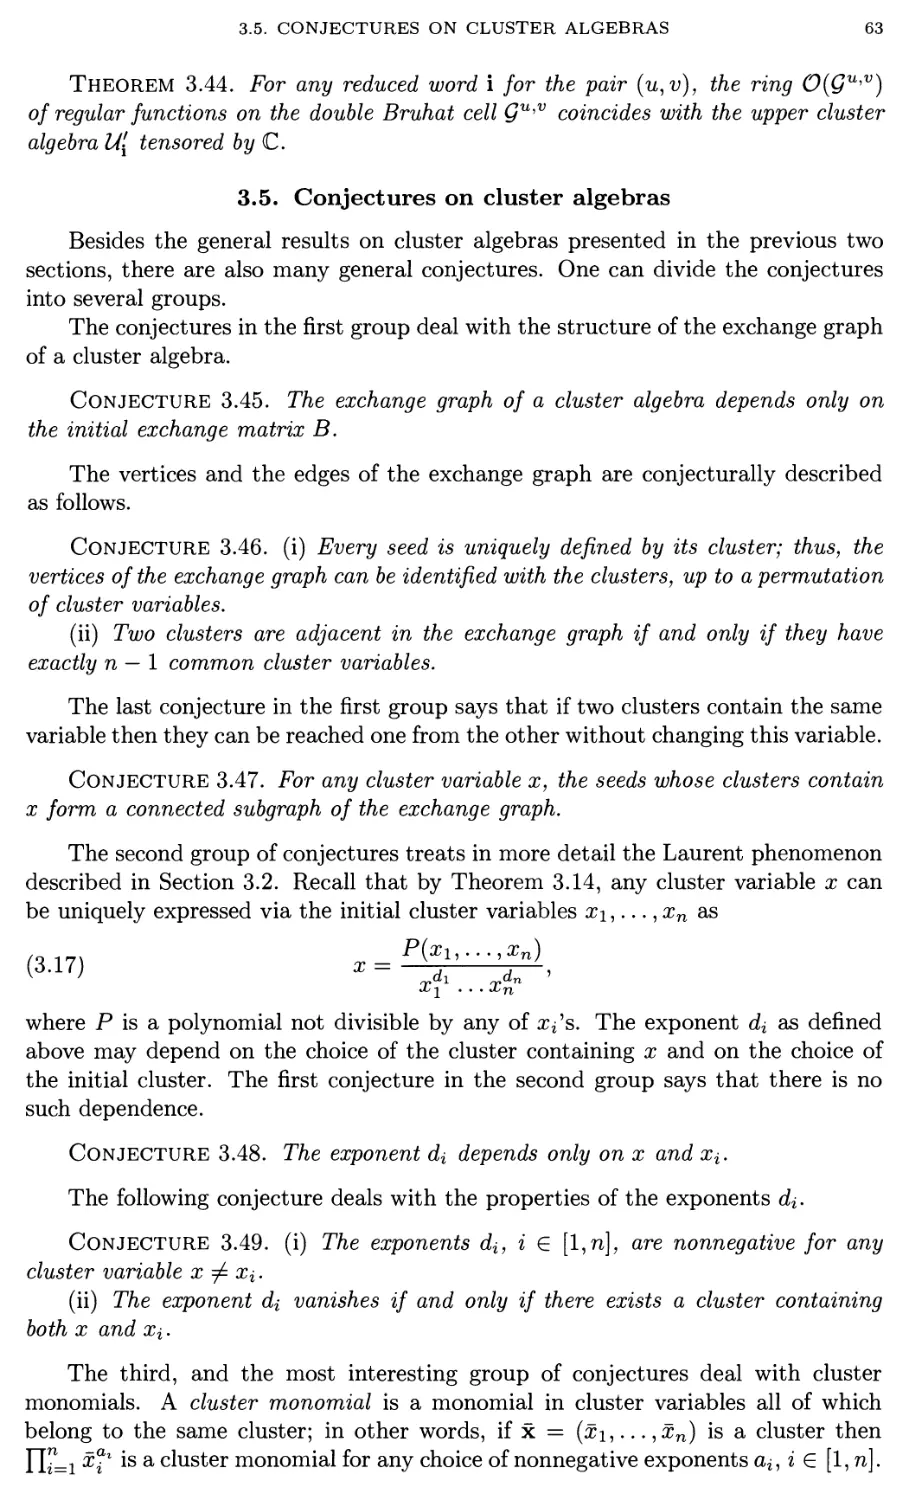 3.5. Conjectures on cluster algebras 77